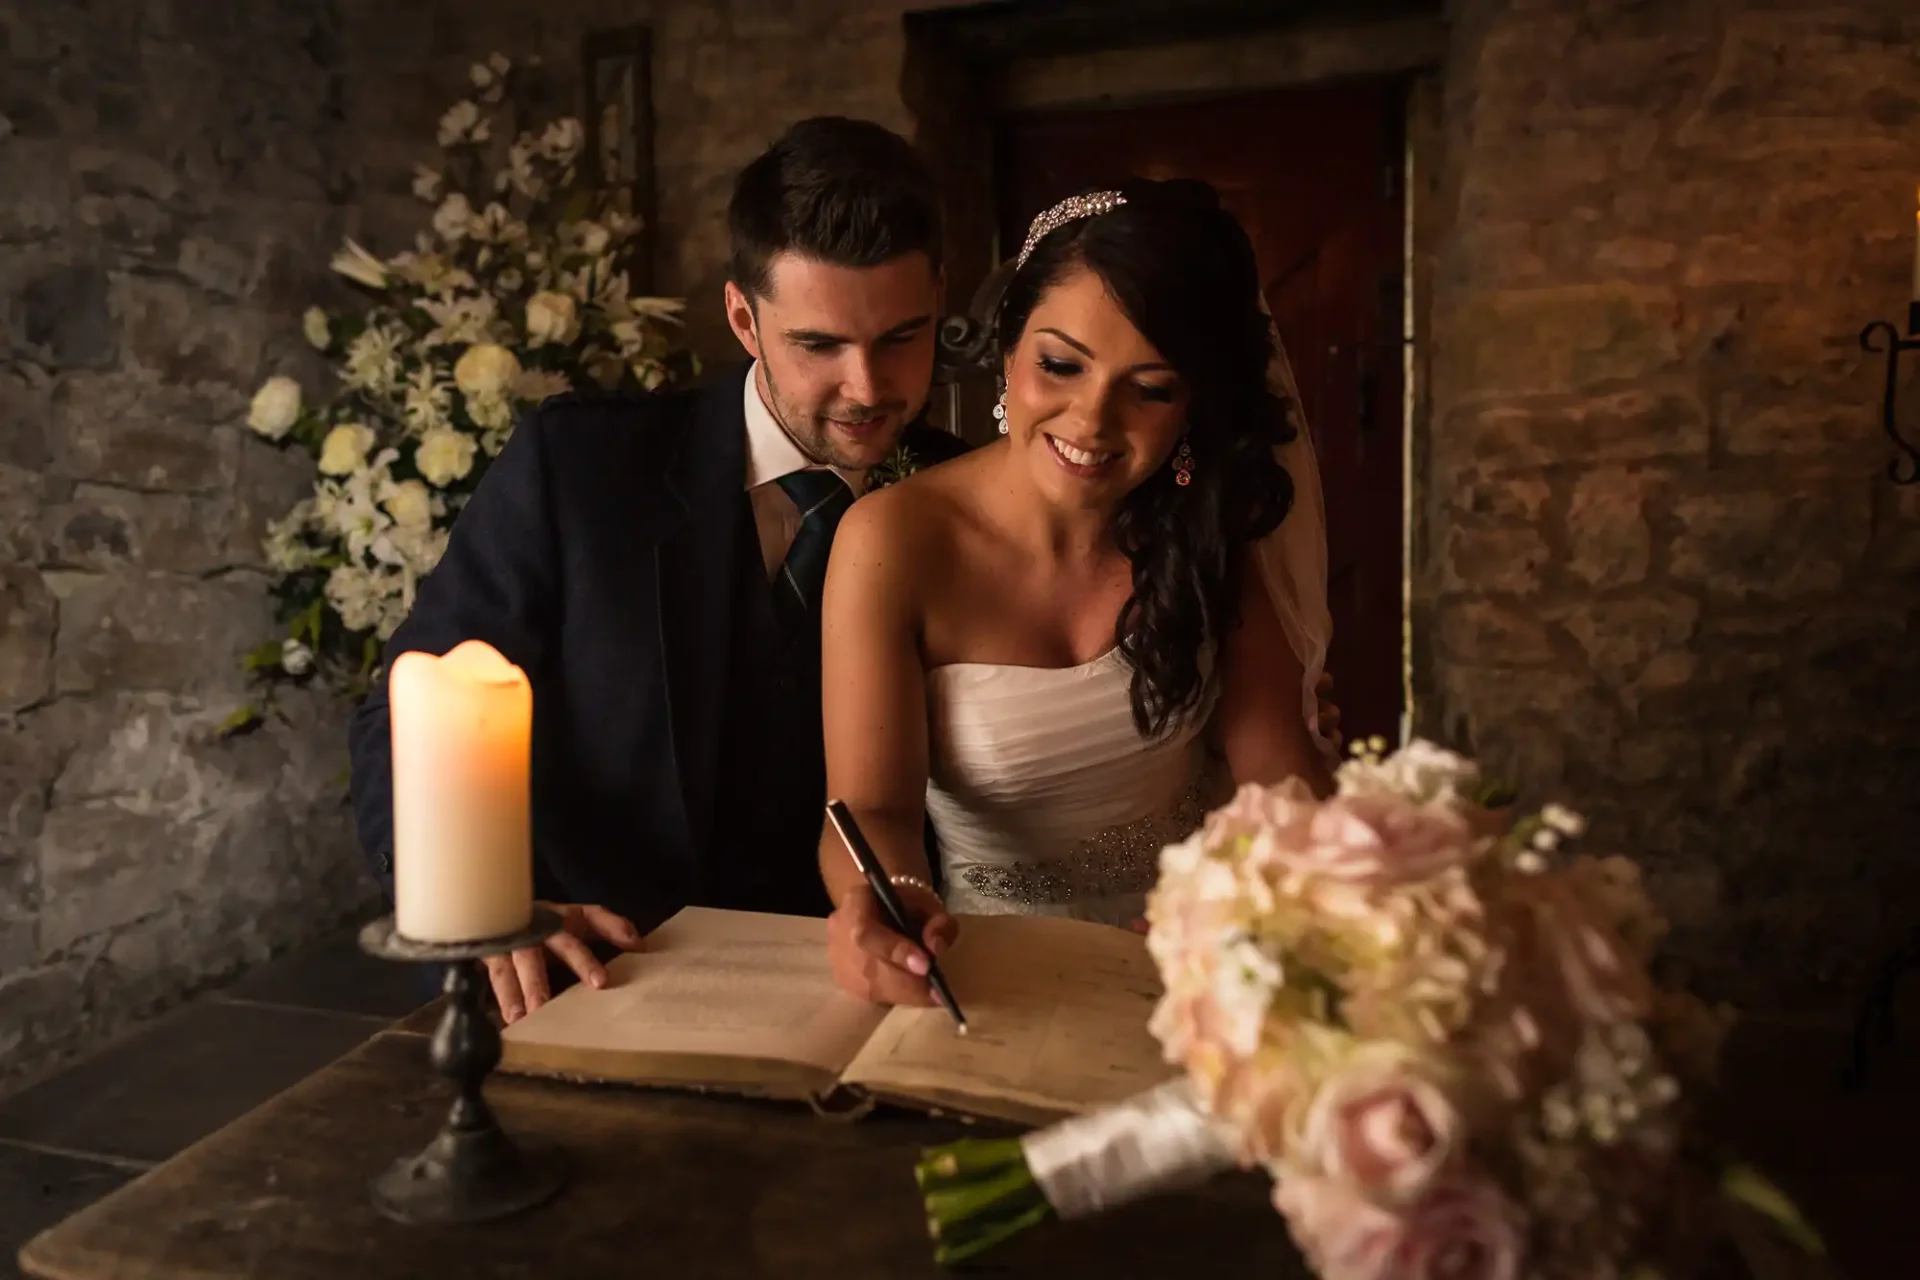 Bride in a white dress and groom in a suit signing a marriage register in a warmly lit, stone-walled room with candles and floral decorations.